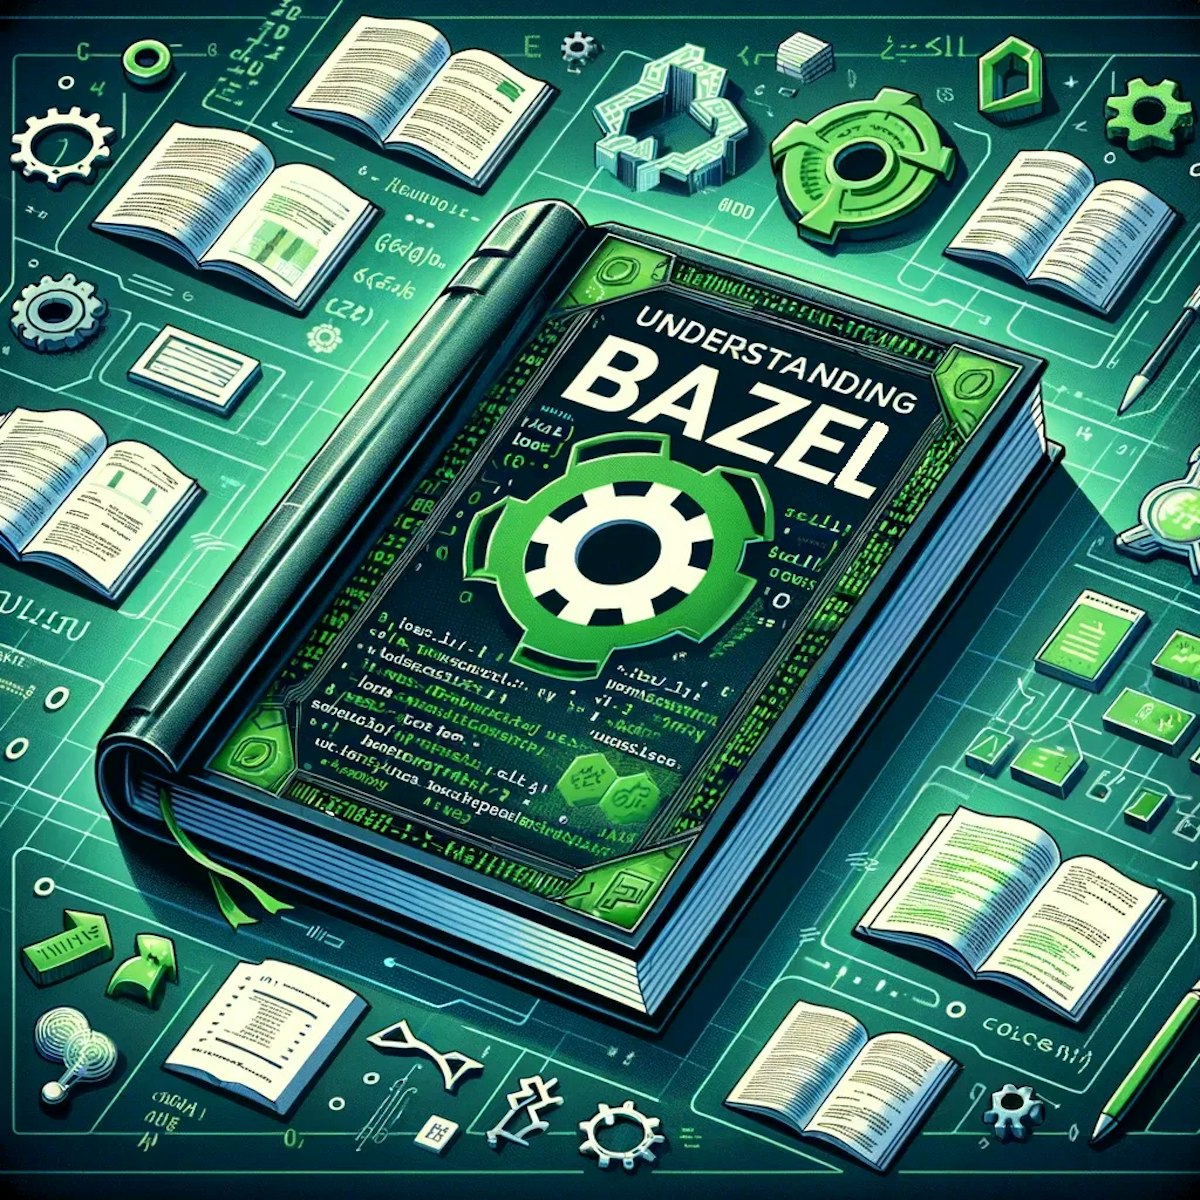 featured image - Bazel: What It Is, How It Works, and Why Developers Need It